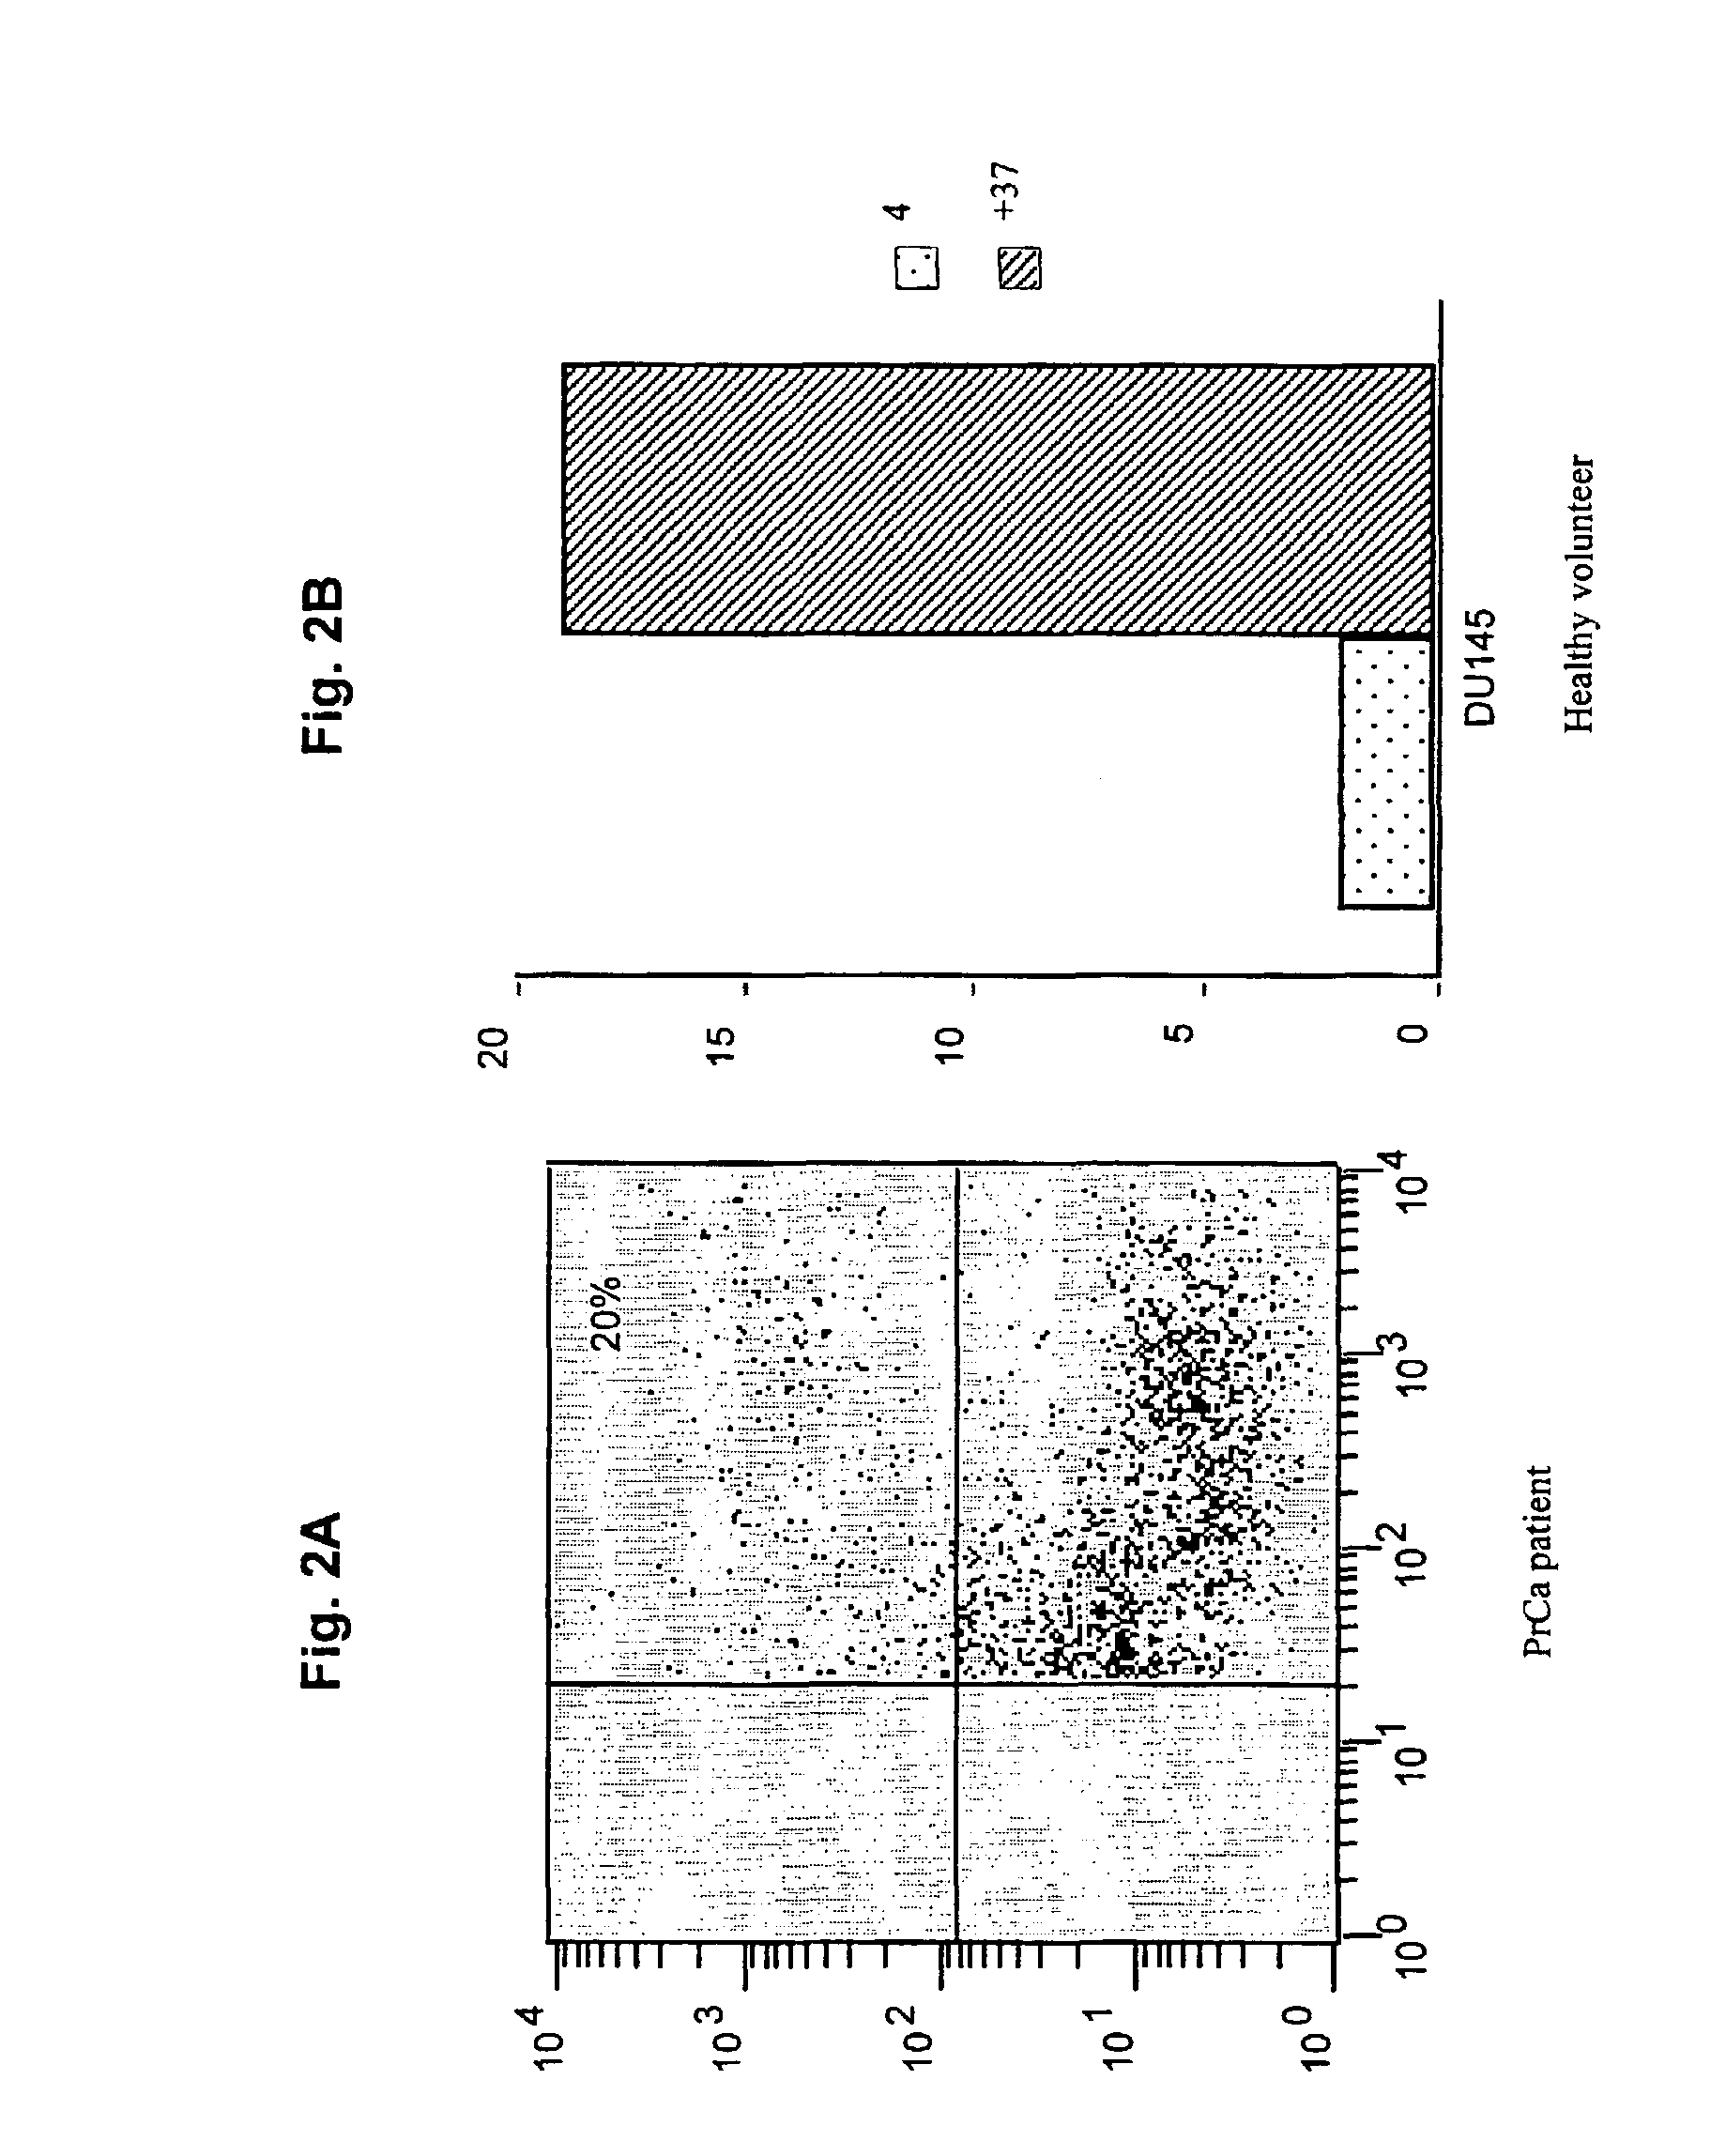 Use of allogeneic cell lines to load antigen presenting cells to elicit or eliminate immune responses